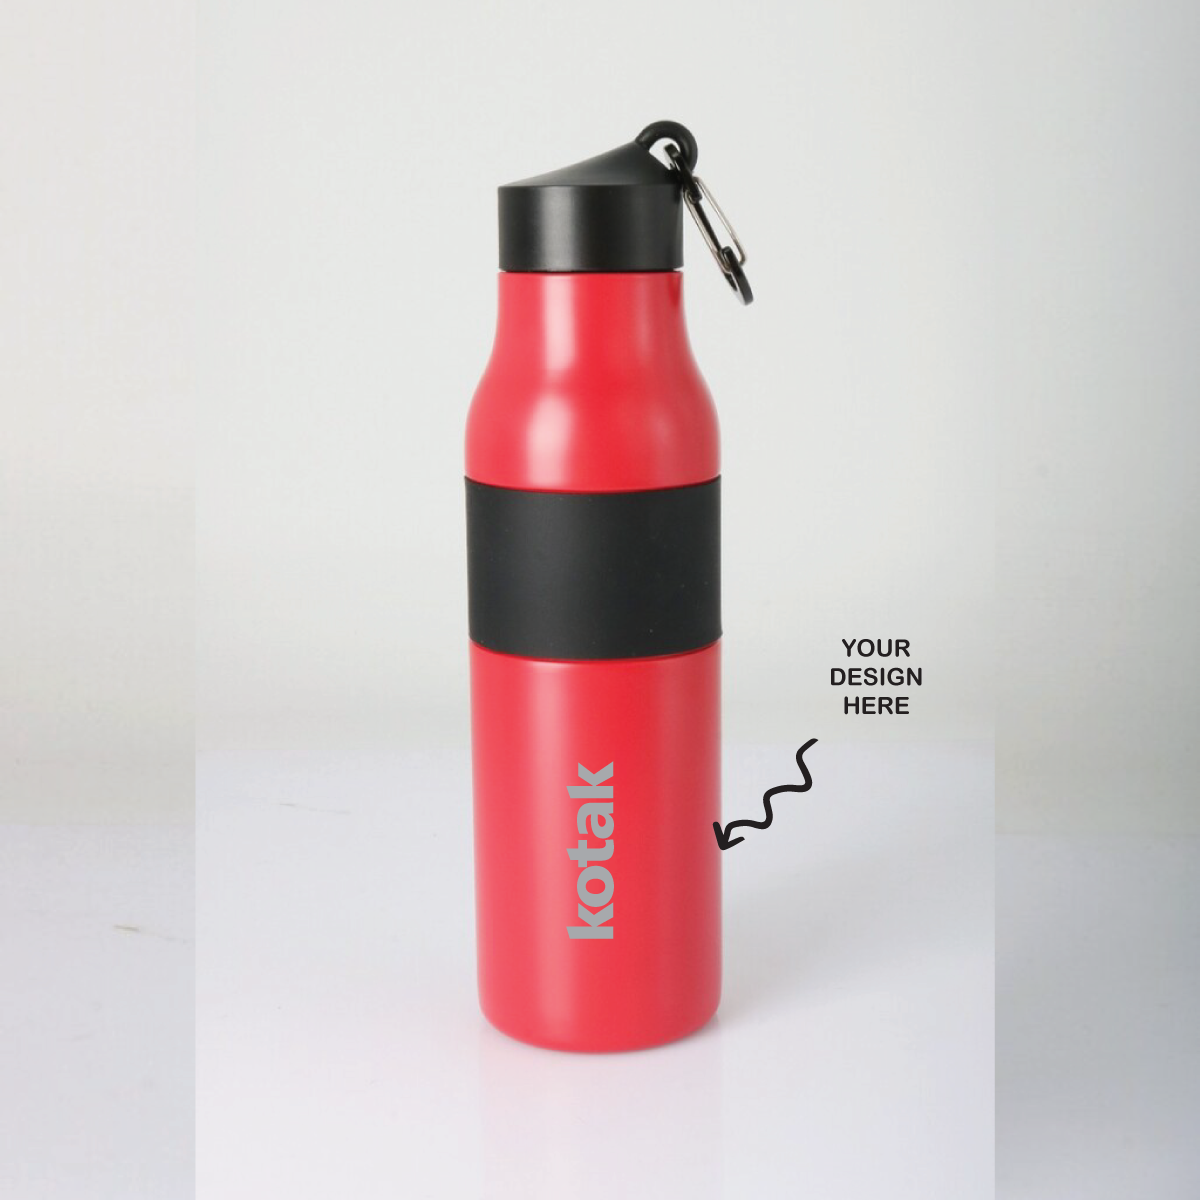 Personalized Engraved Hot and Cold Sports Bottle ORION - For Return Gift, Corporate Gifting, Office or Personal Use